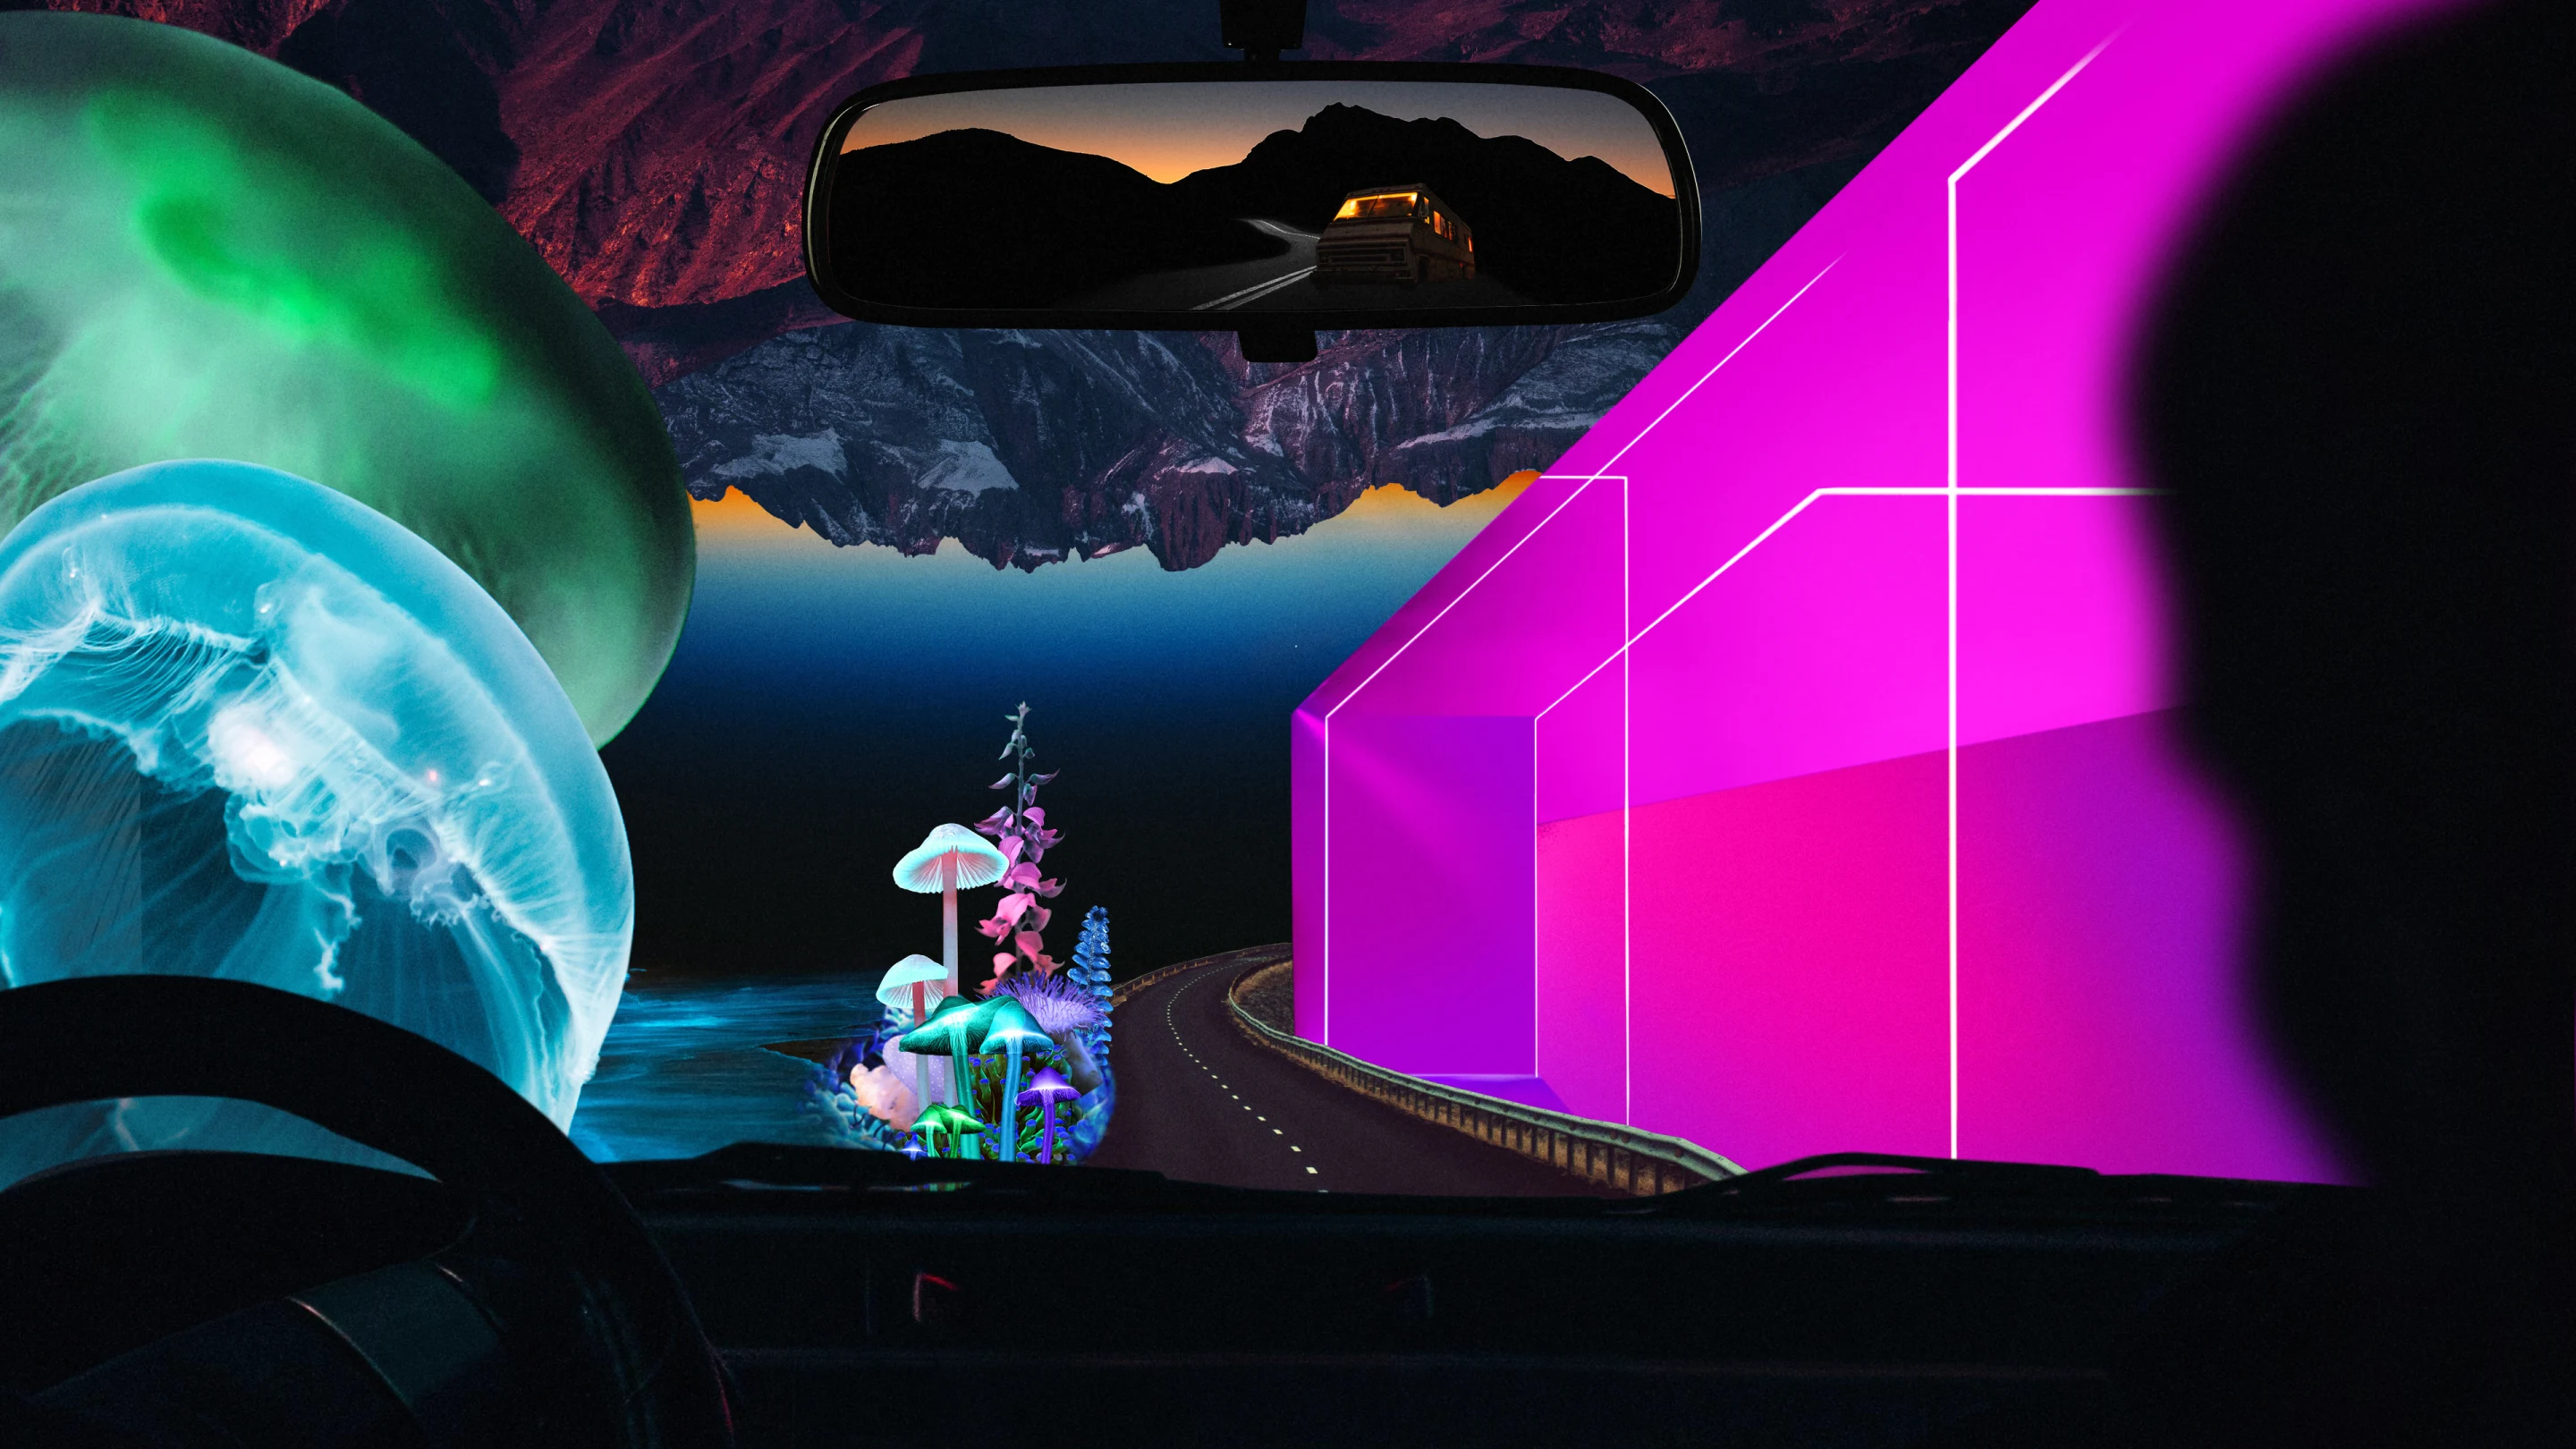 Vibrant collage seen through a car windshield. Large jellyfish on the left, neon pink geometric shape on the right, with dark mountain formations and large cartoon mushrooms in the distance.